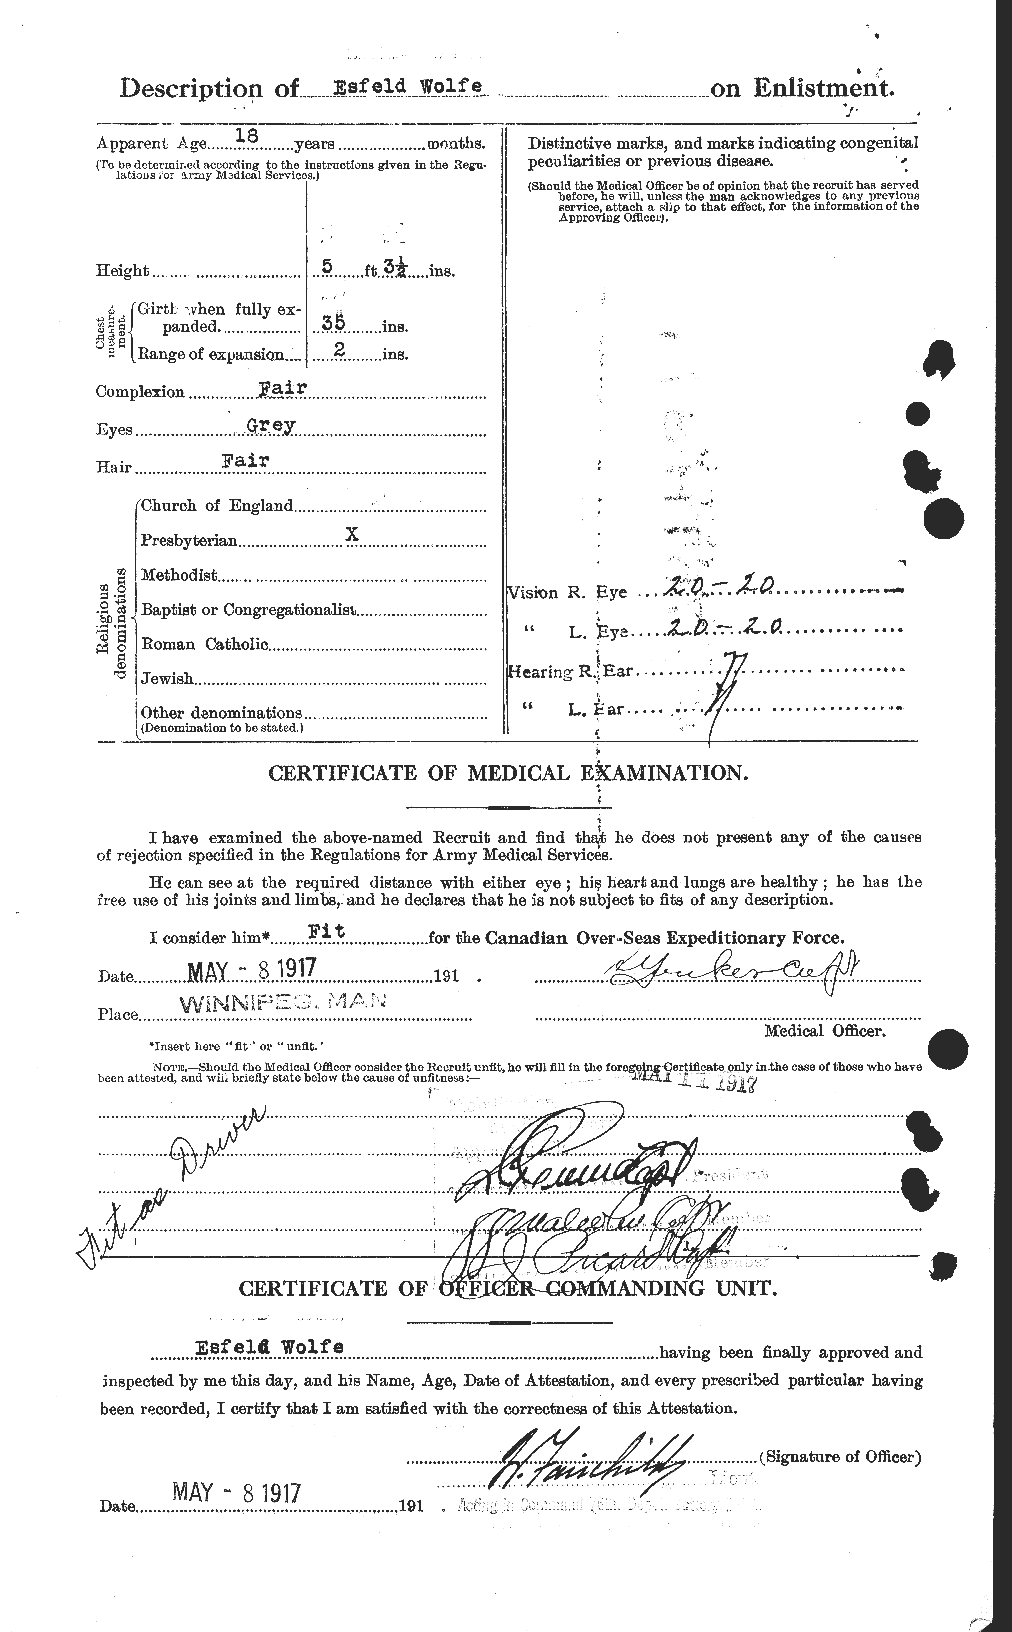 Personnel Records of the First World War - CEF 682329b